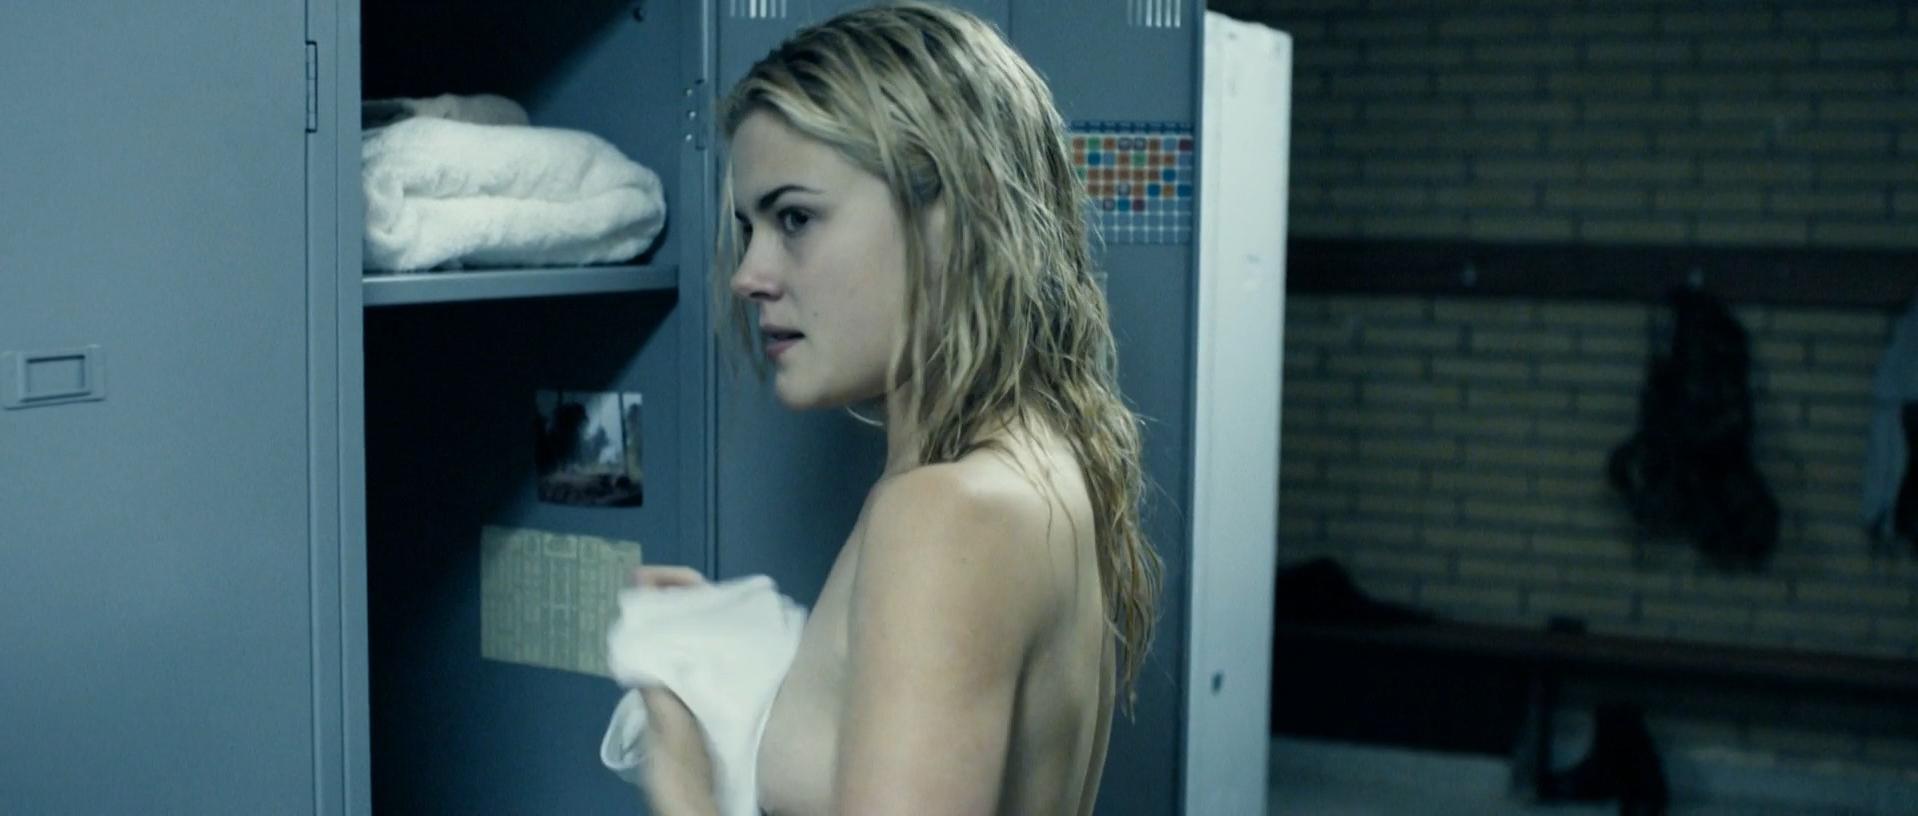 Rachael taylor nude images